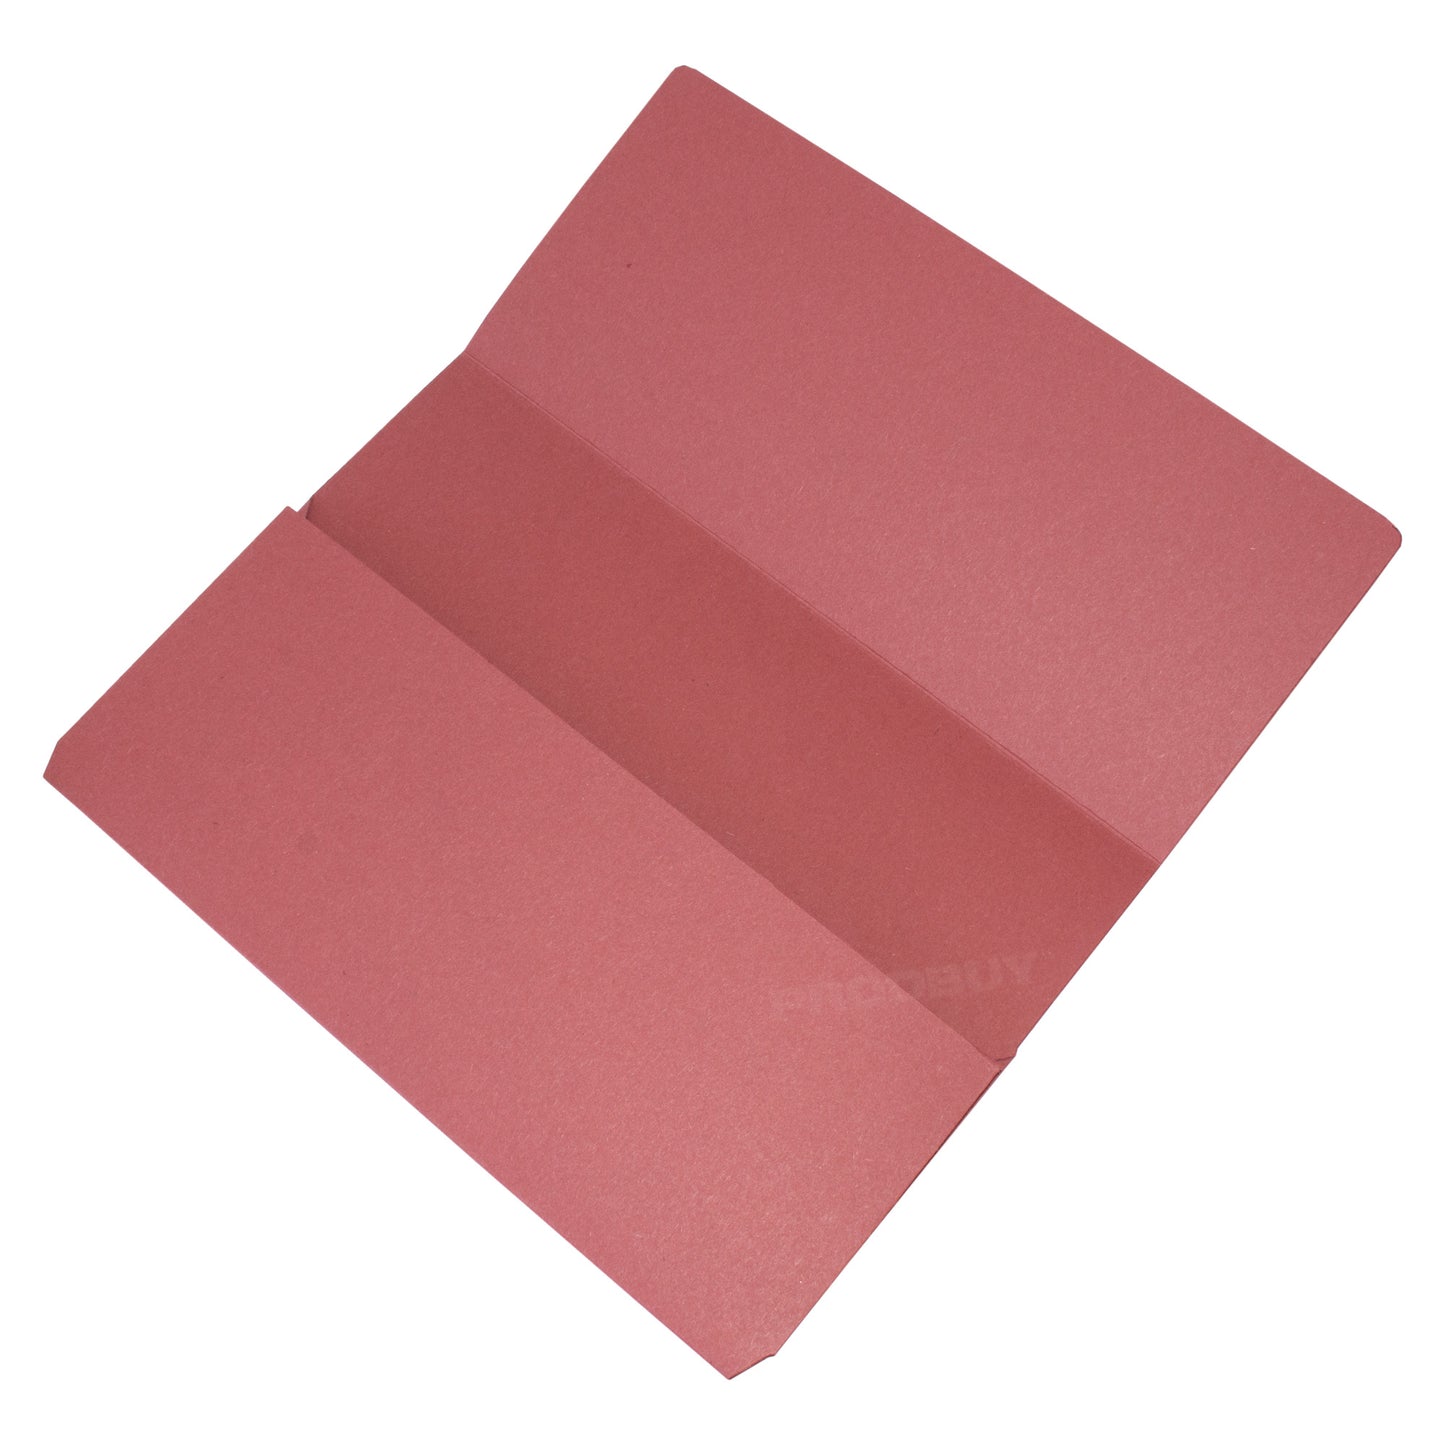 Set of 24 Buff Brown/Pink/Red Foolscap Document Wallets